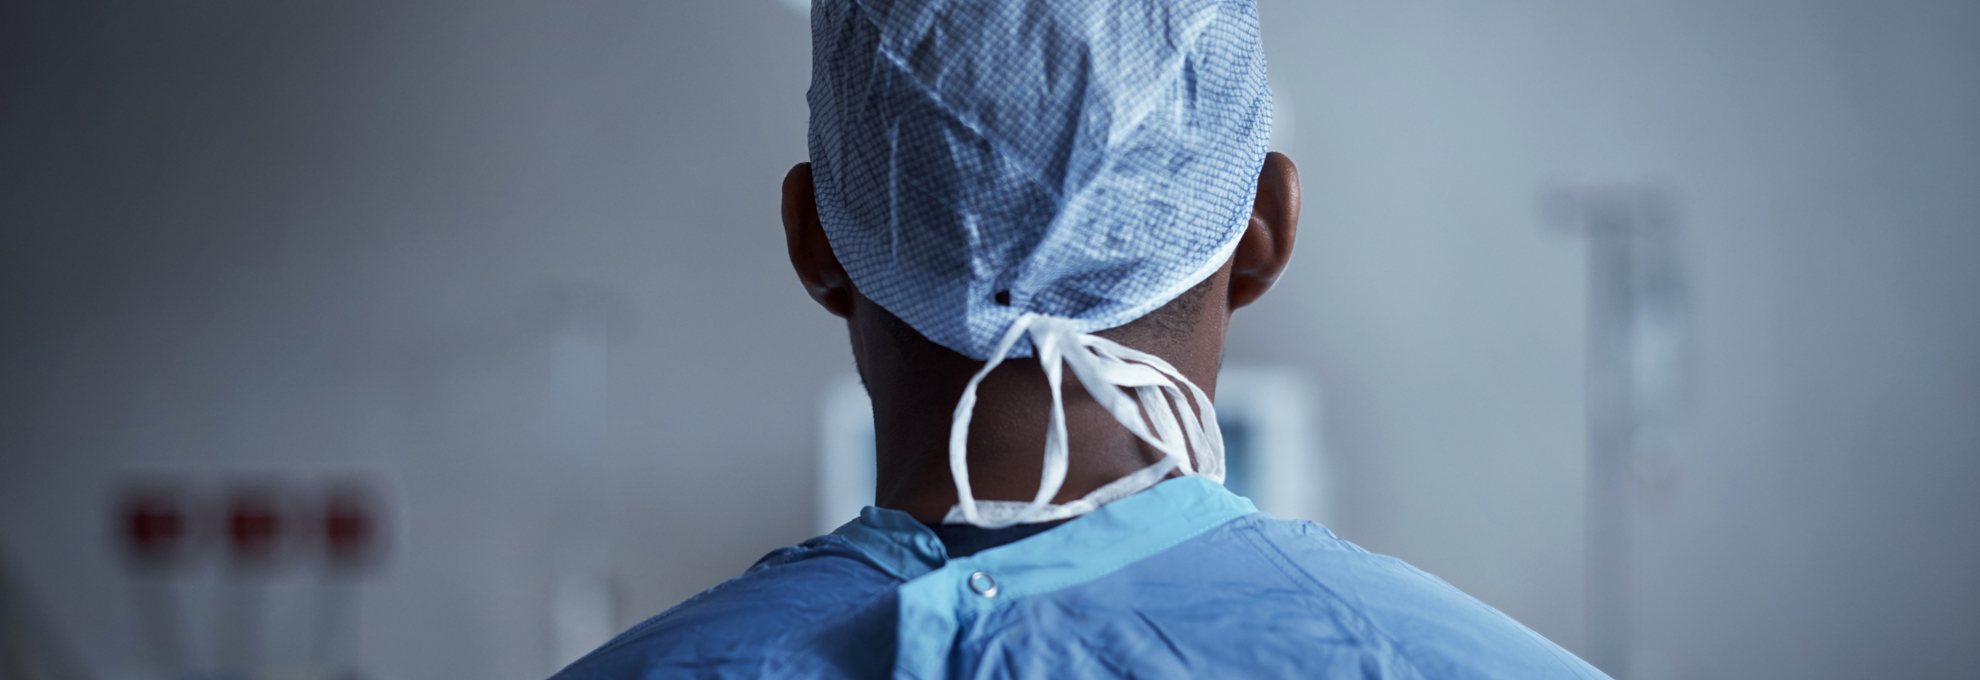 An Electrophysiologist Wearing Blue Surgical Scrubs in a Hospital Operating Room